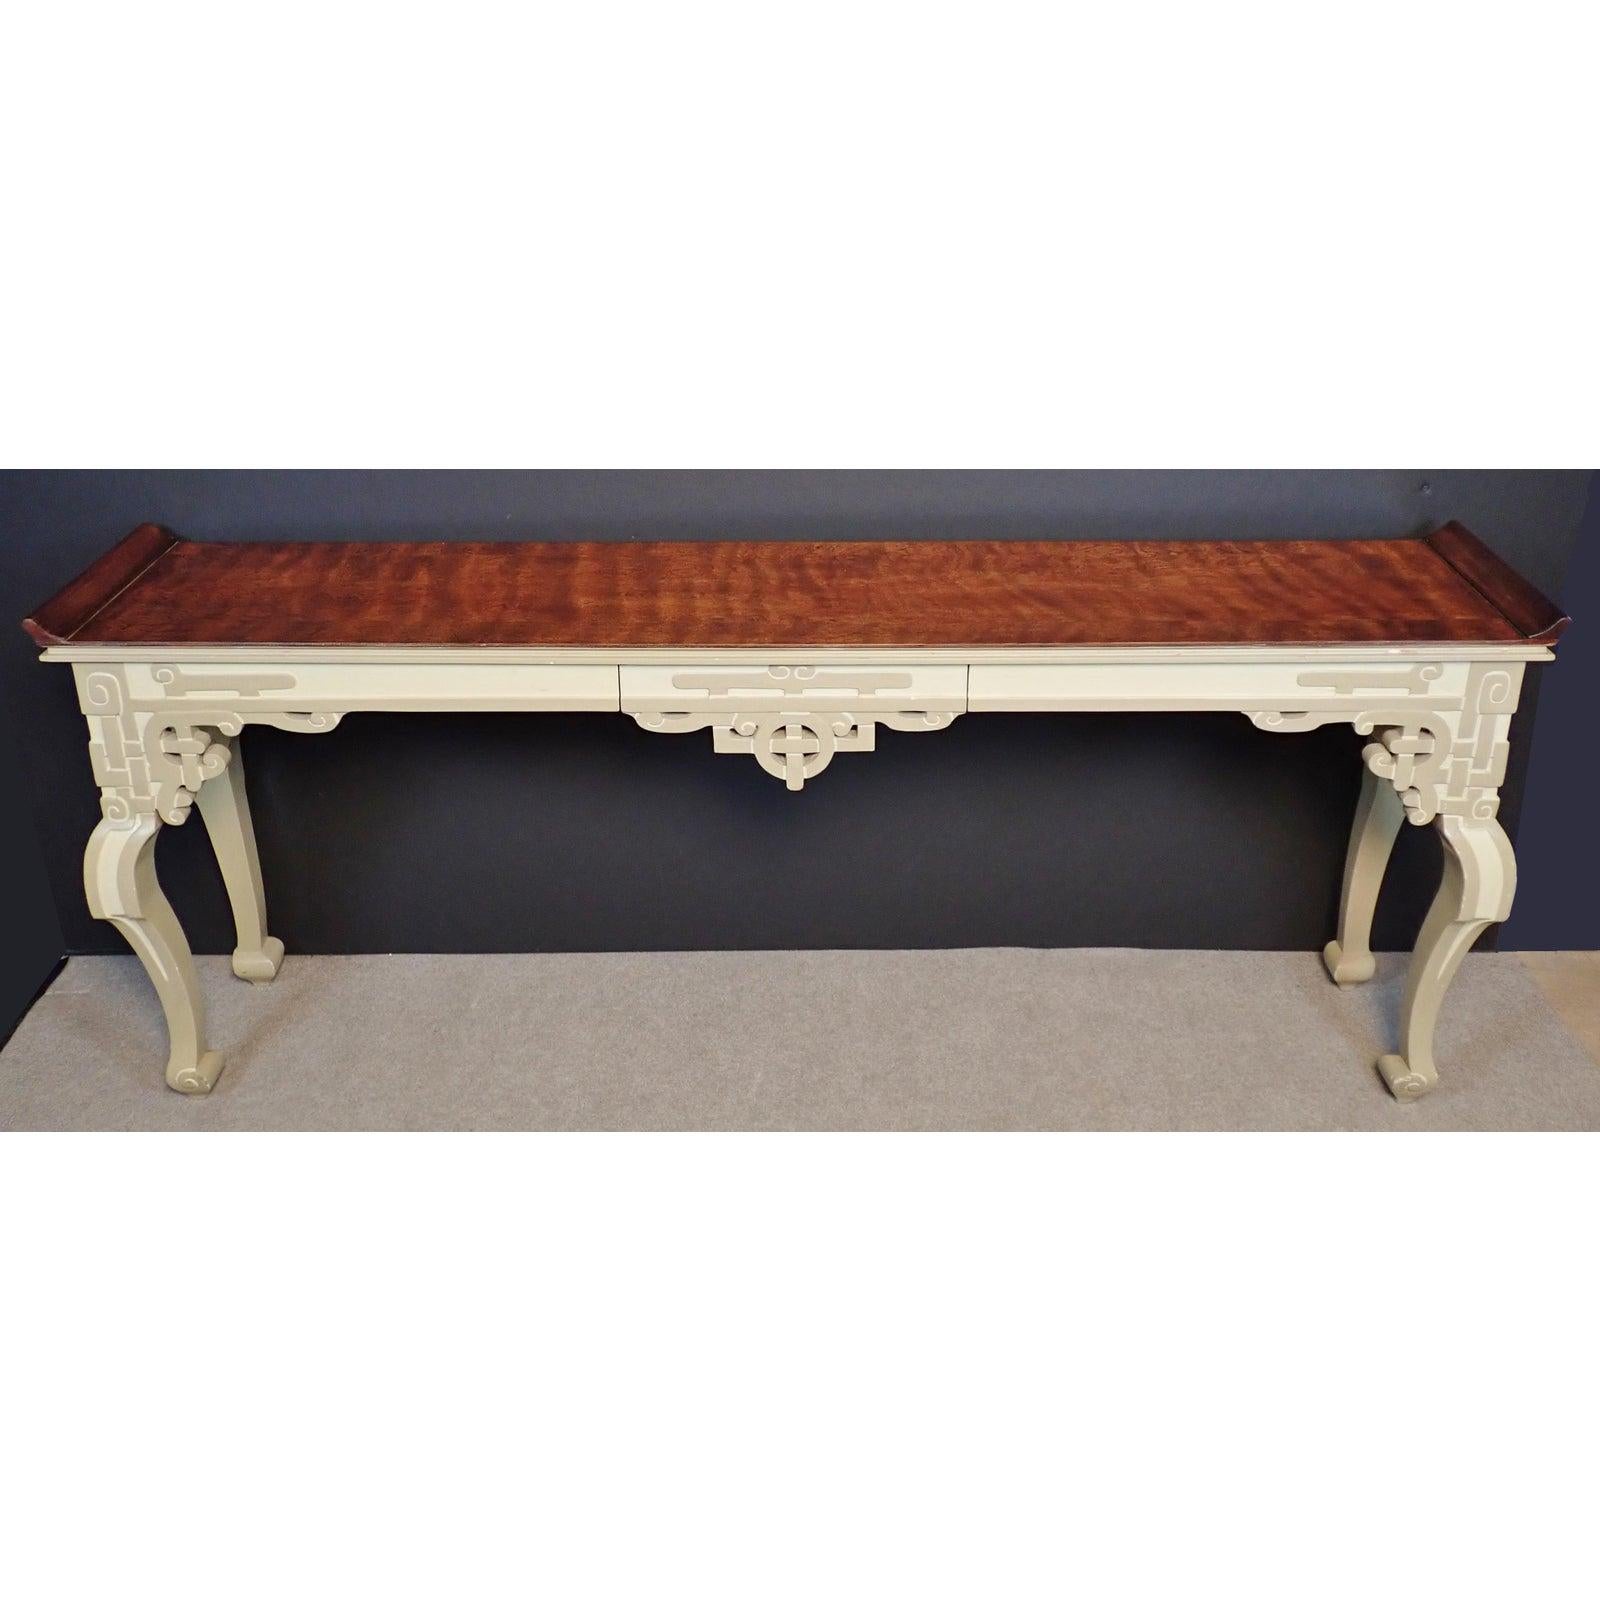 Painted and Burled Wood Console Table. Chinoiserie console table. Painted in two tones of eggshell. Beautiful finished burl wood top